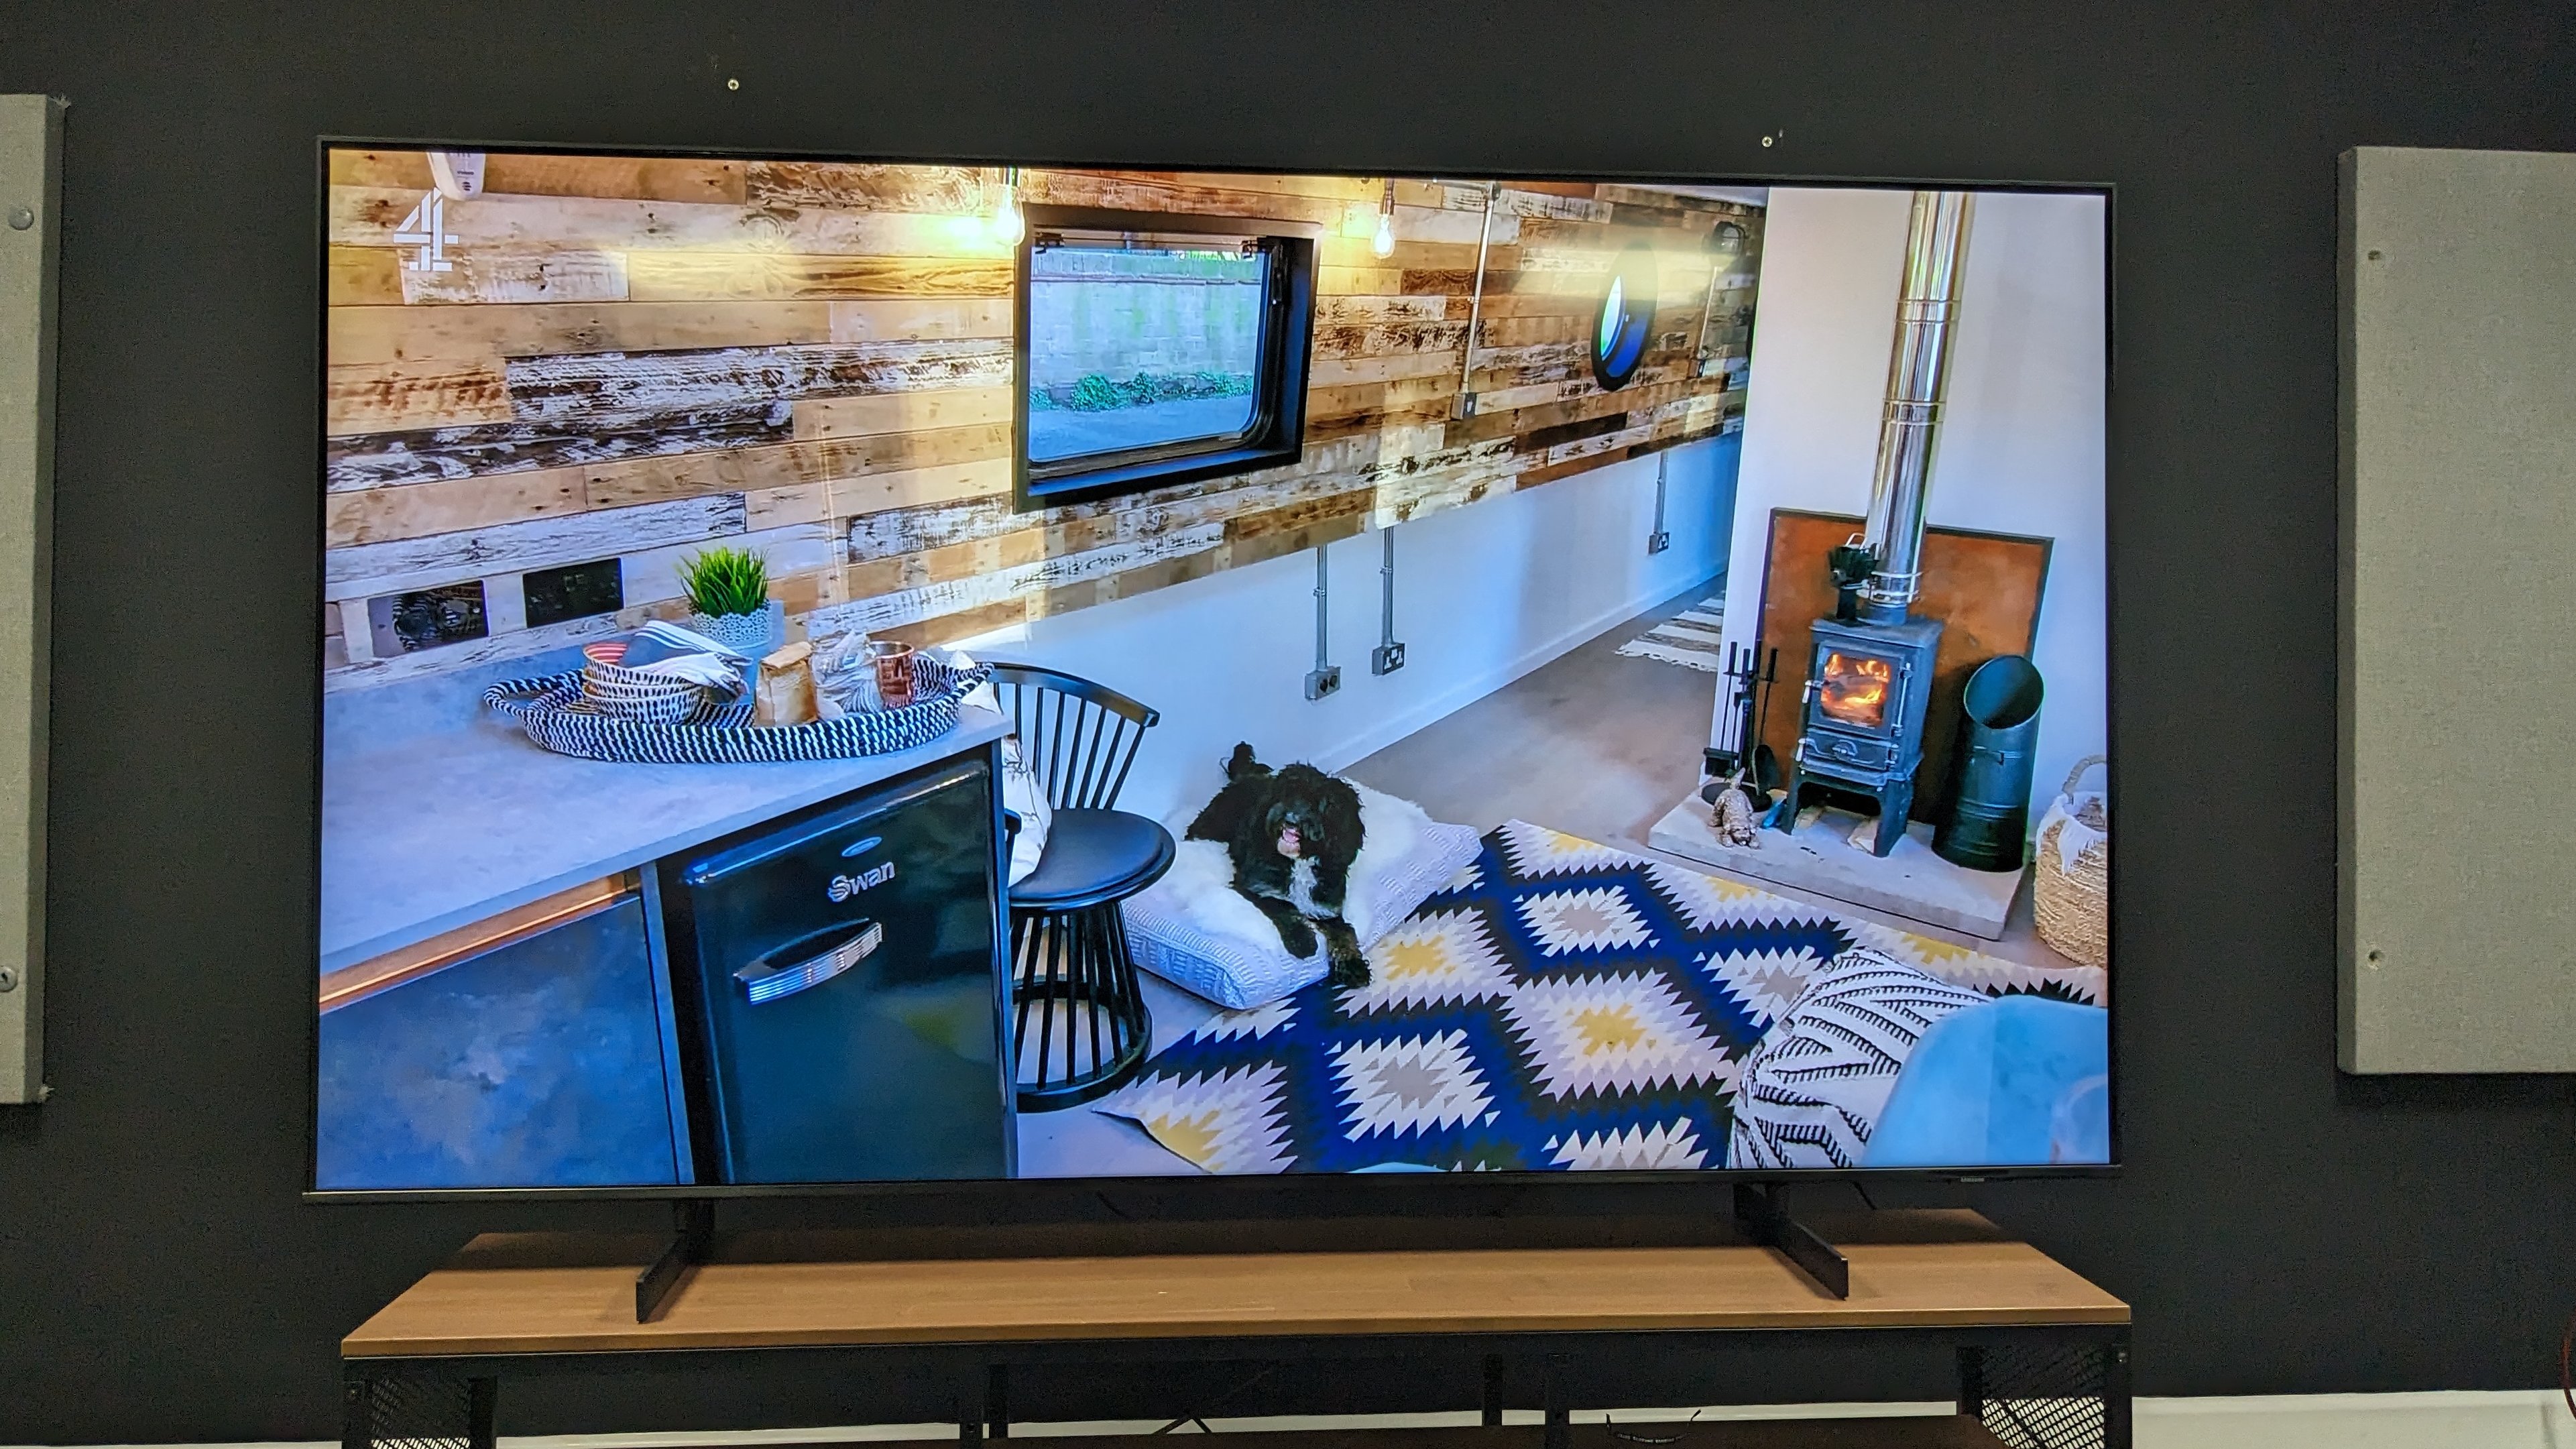 Samsung CU8000 with dog and living room on screen from HD live TV